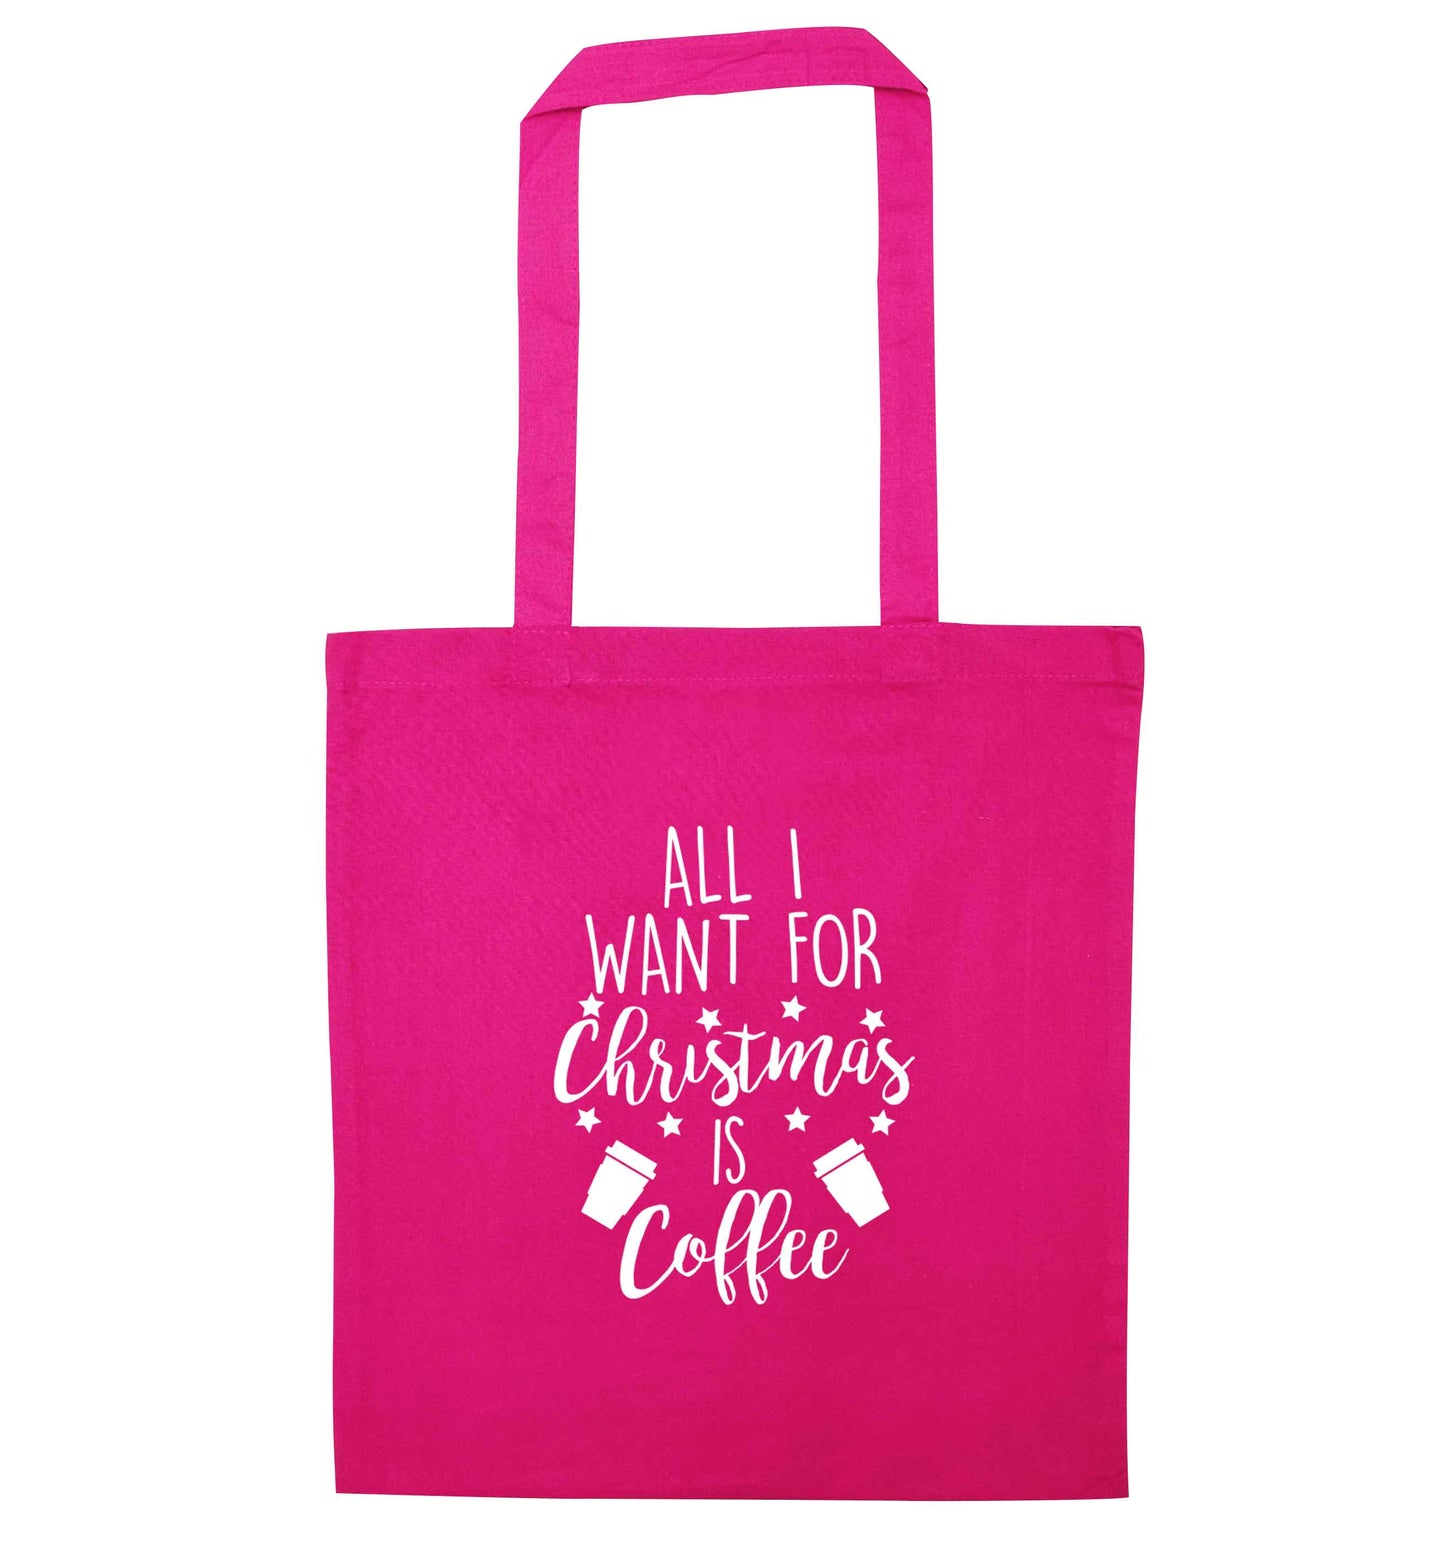 All I want for Christmas is coffee pink tote bag